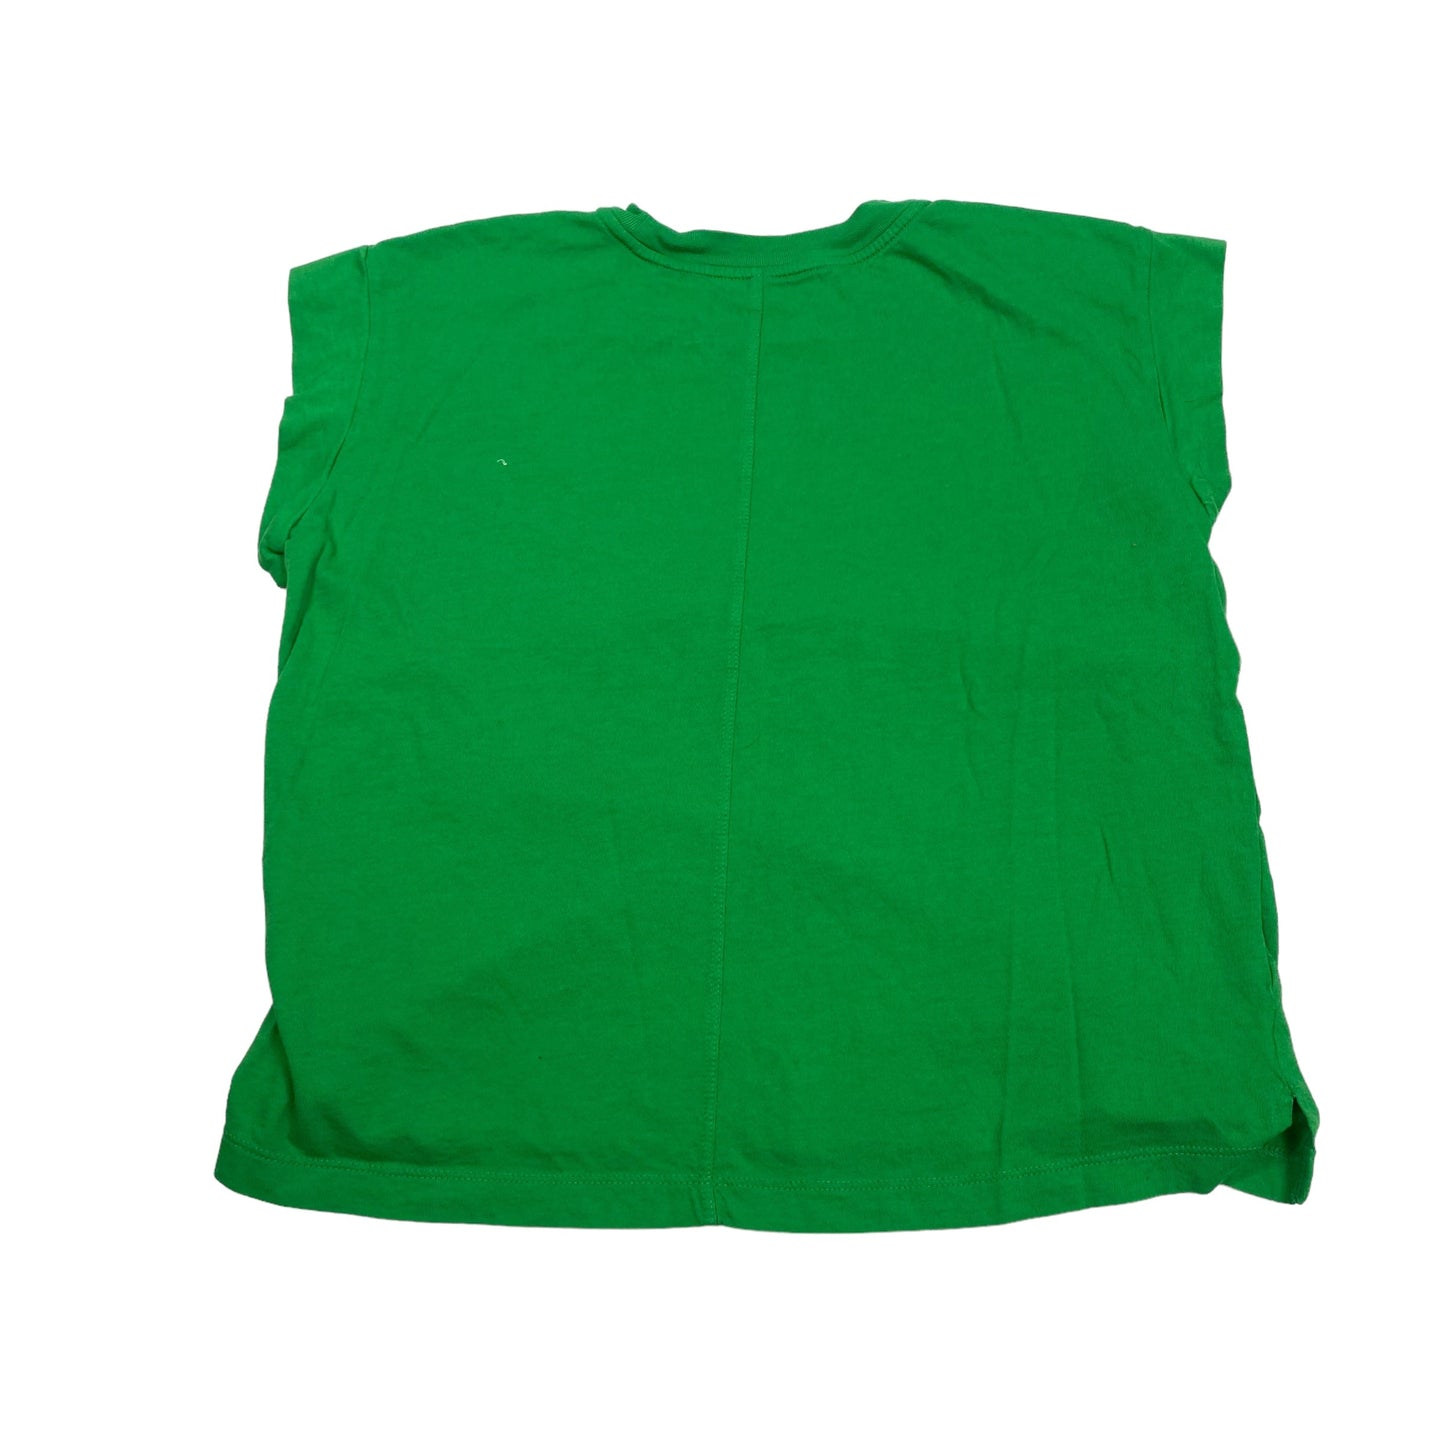 Green Top Sleeveless A New Day, Size S